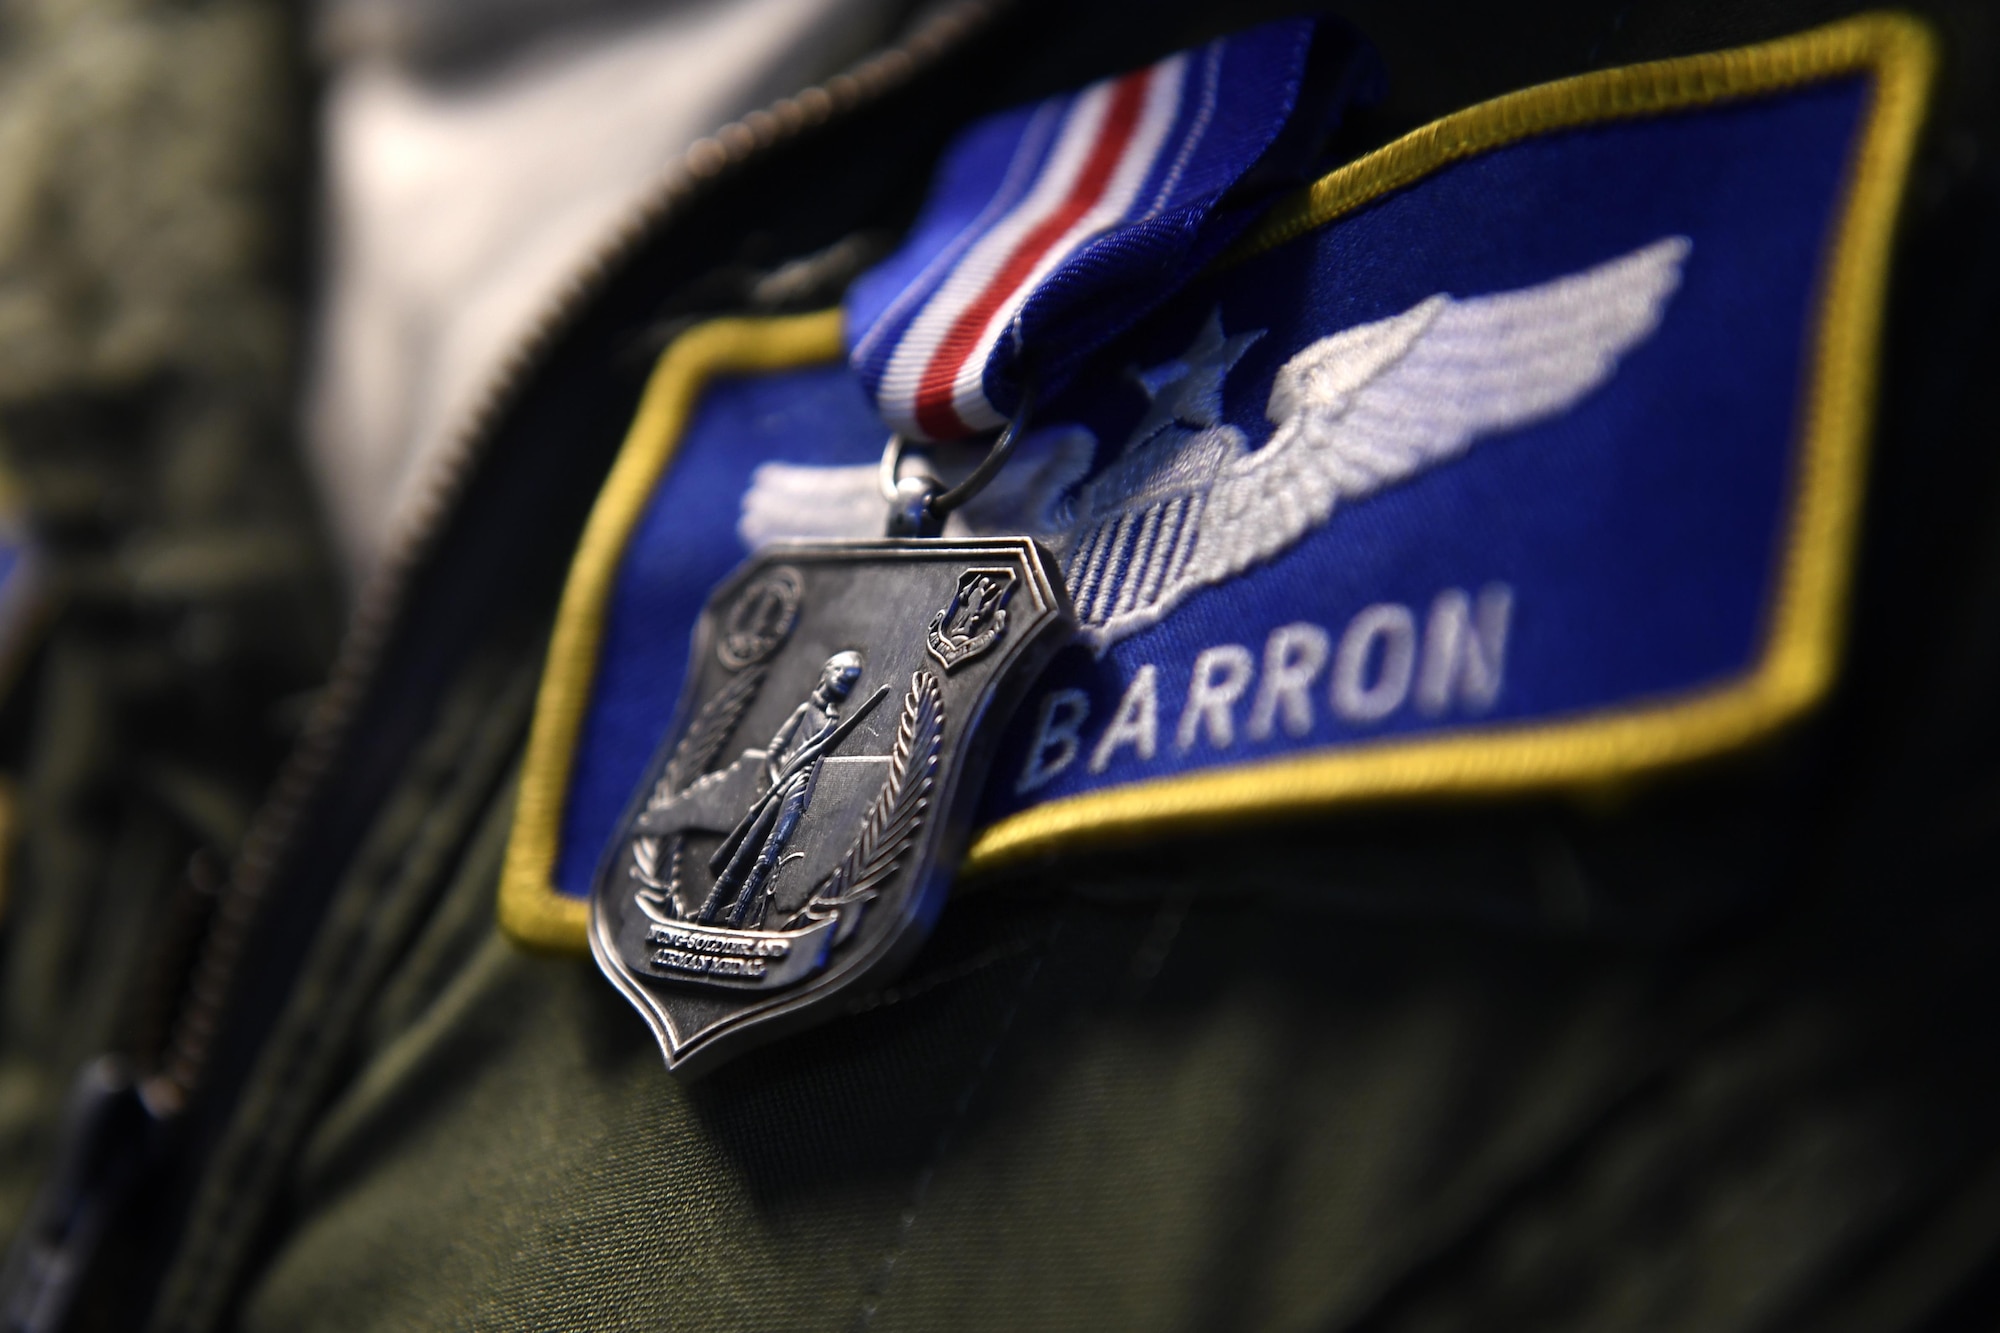 U.S. Air Force Maj. Nathan Barron, 156th Airlift Wing, shows his family the North Carolina National Guard Soldier and Airman Medal for heroism after a presentation ceremony held at the North Carolina Air National Guard Base, Charlotte Douglas International Airport, April 1, 2017. Barron was awarded the medal for his decisive and courageous actions as civilian pilot on a PSA Airlines flight where he tackling and maneuvering an unruly passenger to the ground after he assaulted a flight attendant. Barron continued to subdue the passenger until law enforcement arrived which saved the lives of the crew as well as others aboard the plane. The medal was recently created to honor Soldiers and Airmen for heroic actions performed while out of the military uniform.